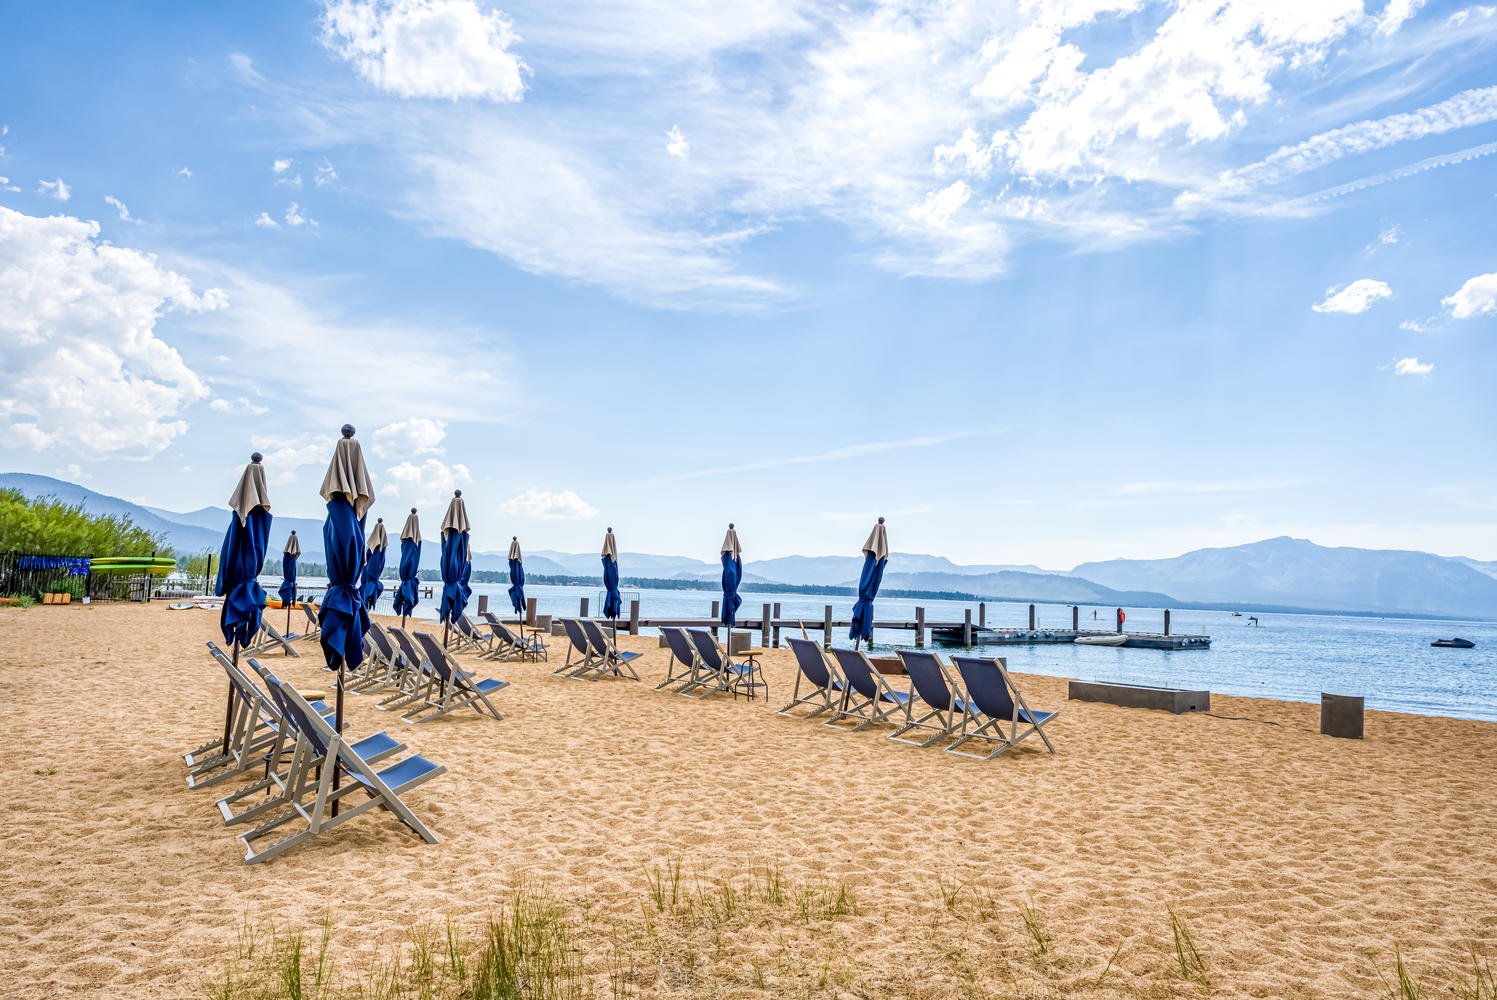 Tahoe Beach Club's private beach, where rows of beach chairs and vibrant umbrellas dot the sandy landscape. (Copy) (Copy) (Copy)